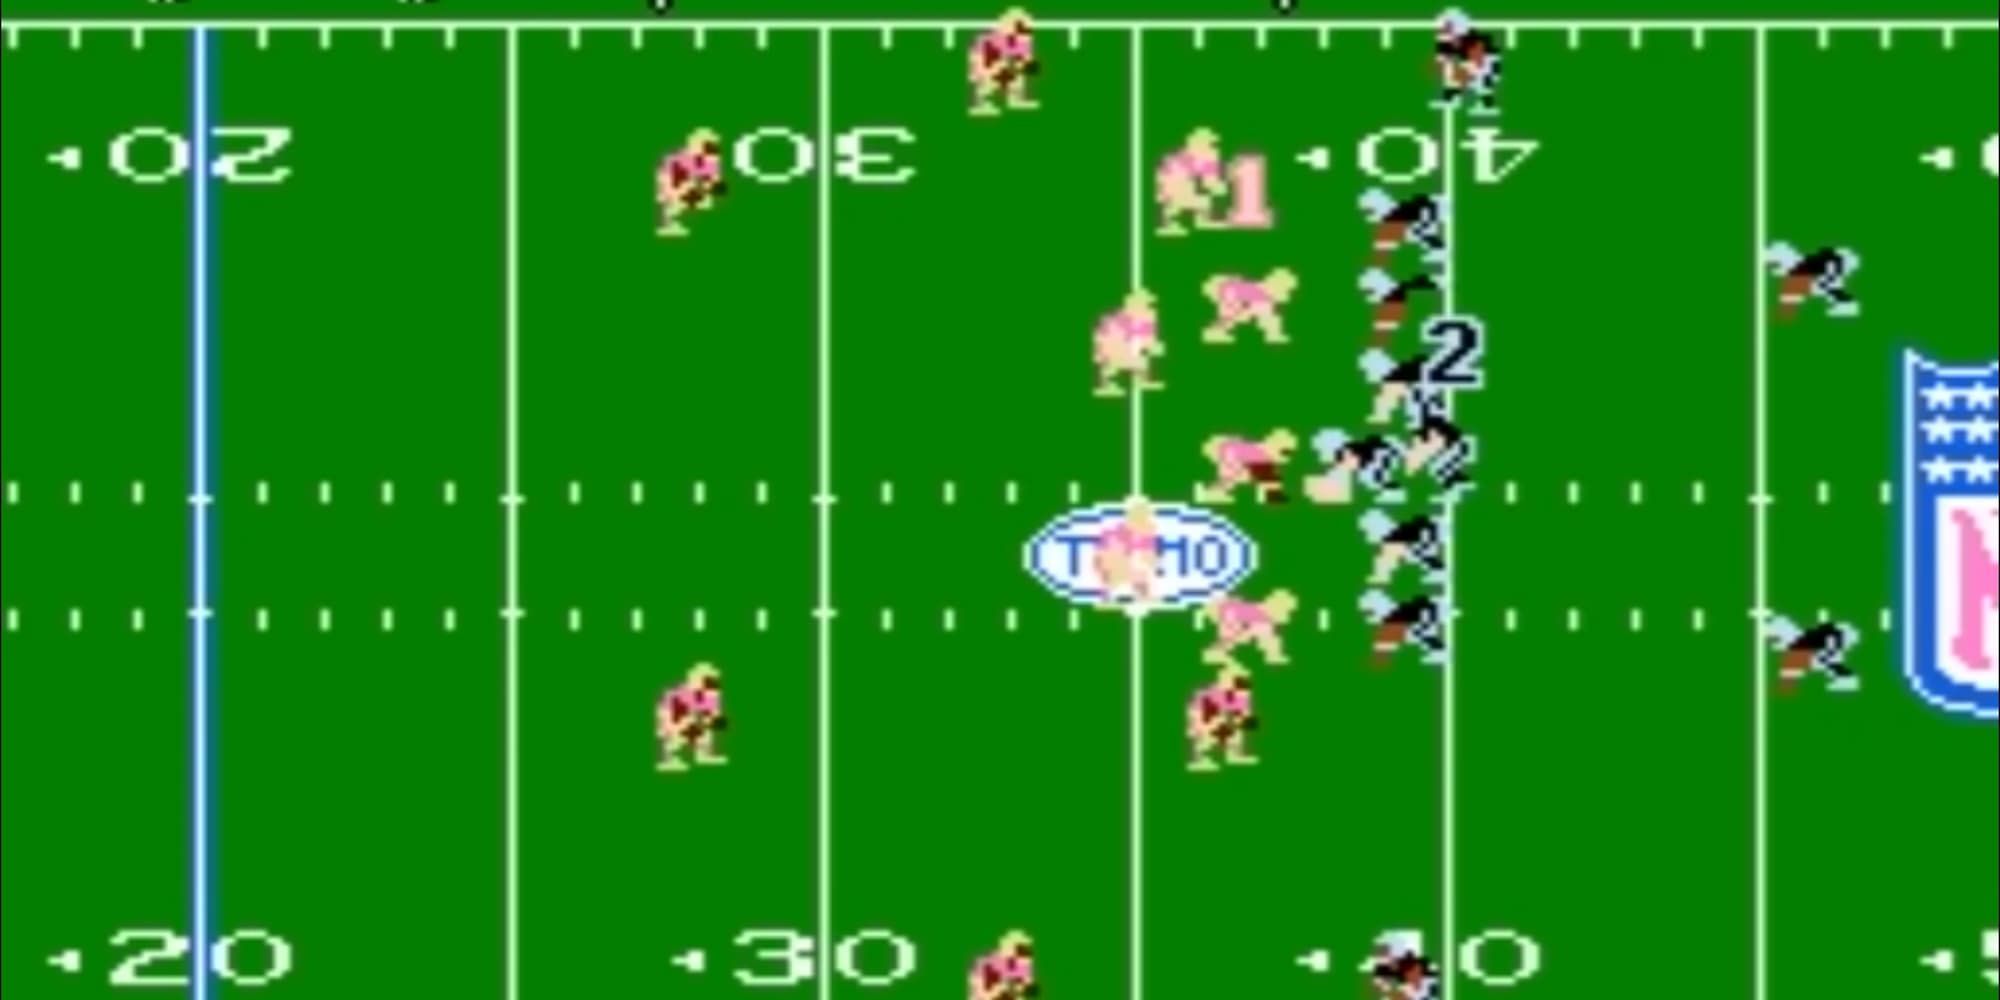 Two teams will face off at the line of scrimmage at the Tecmo Super Bowl.